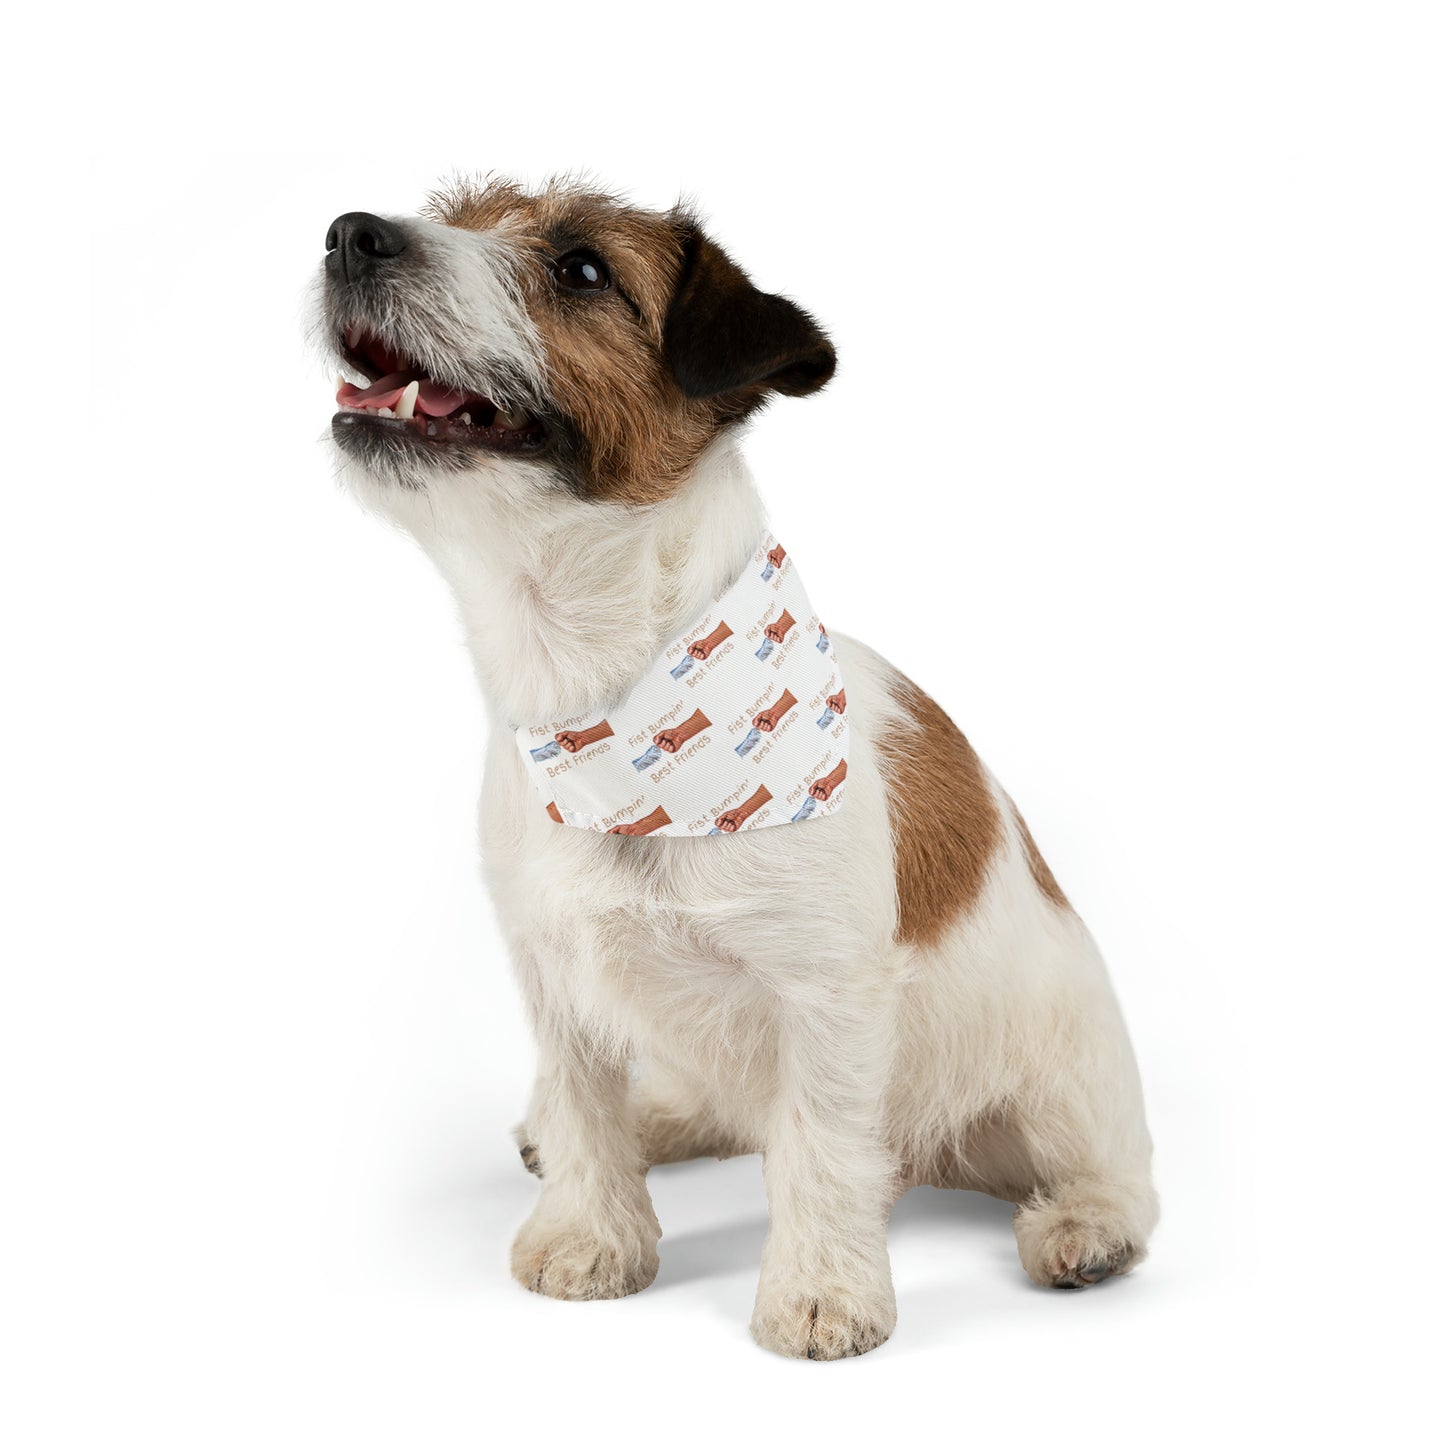 Fist Bumpin’ Best Friends Opie’s Cavalier King Charles Spaniel Pet Bandana Collar White with Tan lettering.